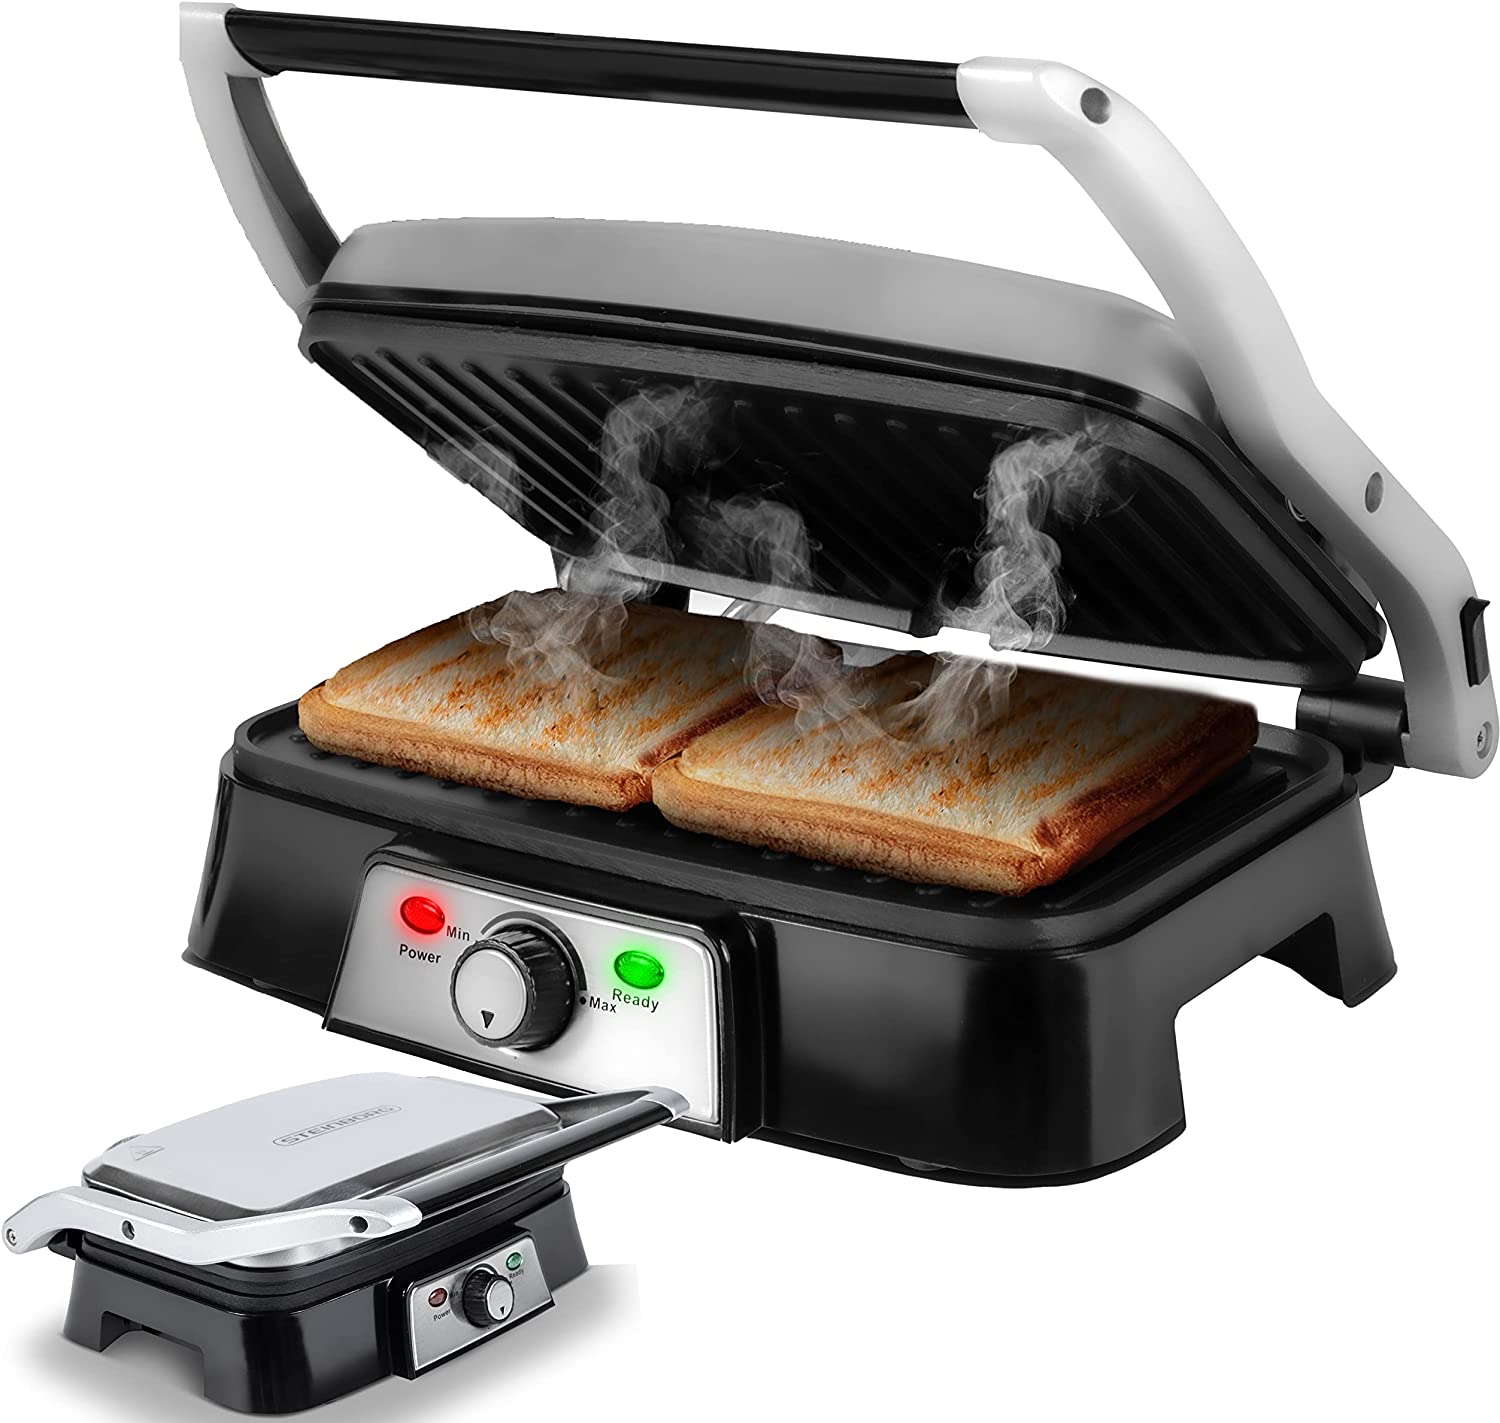 Steinborg Contact grill, panini grill, sandwich toaster, electric table grill, 180° opening, grill, non-stick coating, thermostat, cool touch technology, grease drip tray